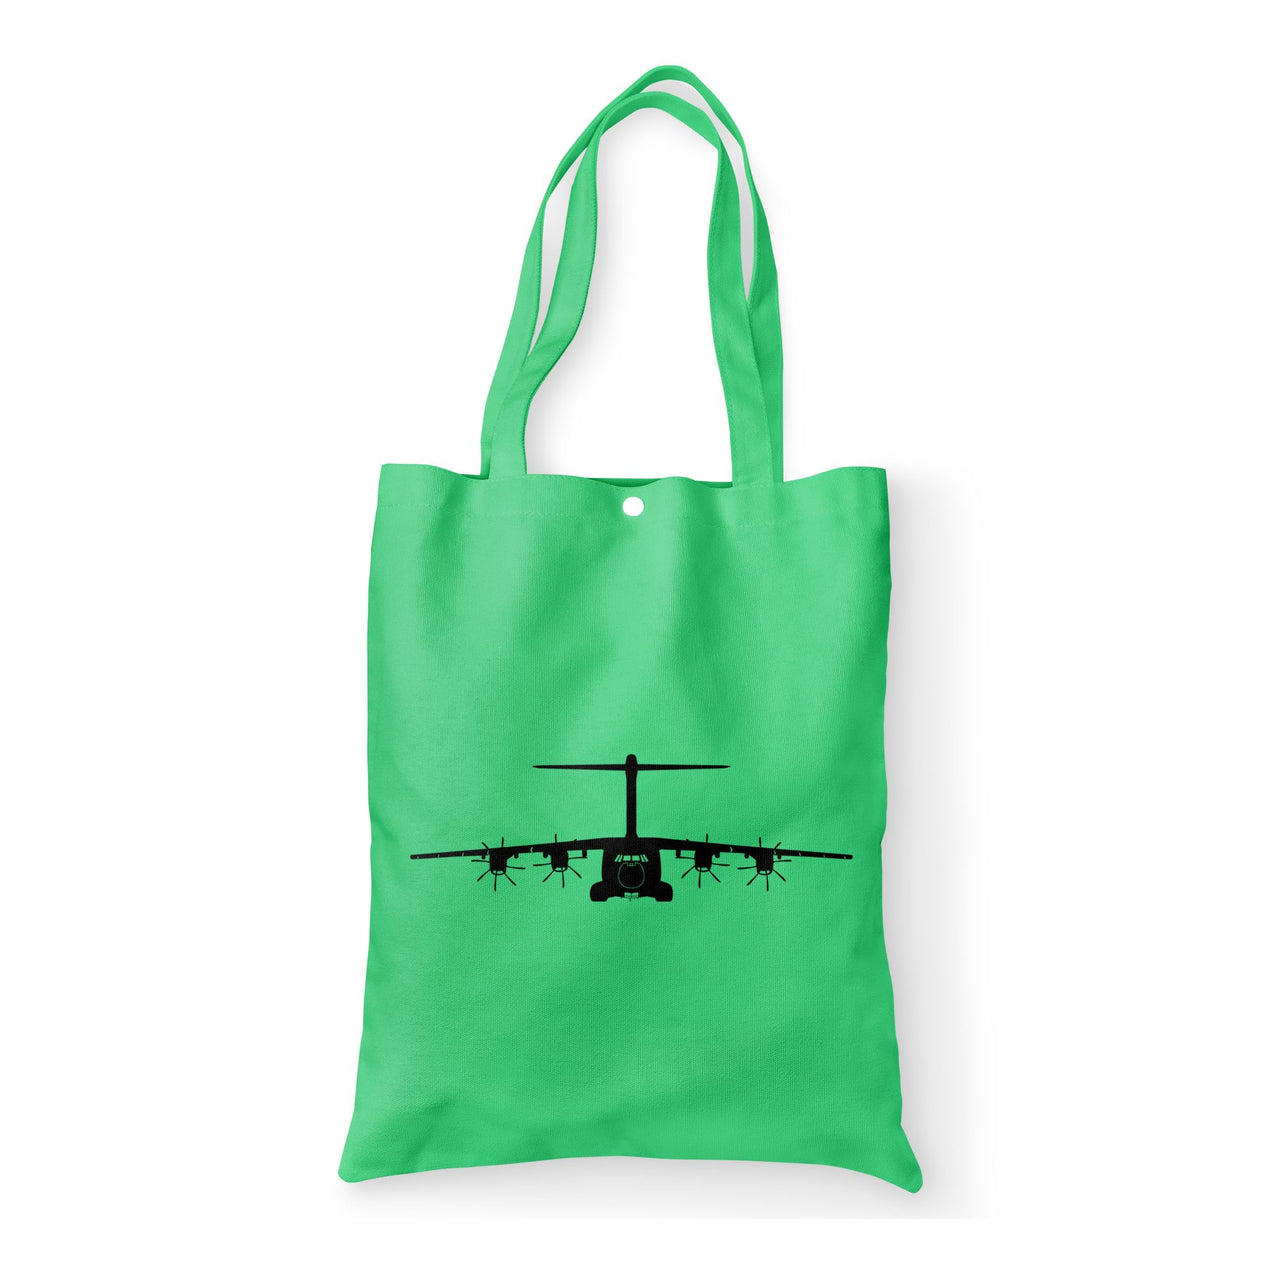 Airbus A400M Silhouette Designed Tote Bags